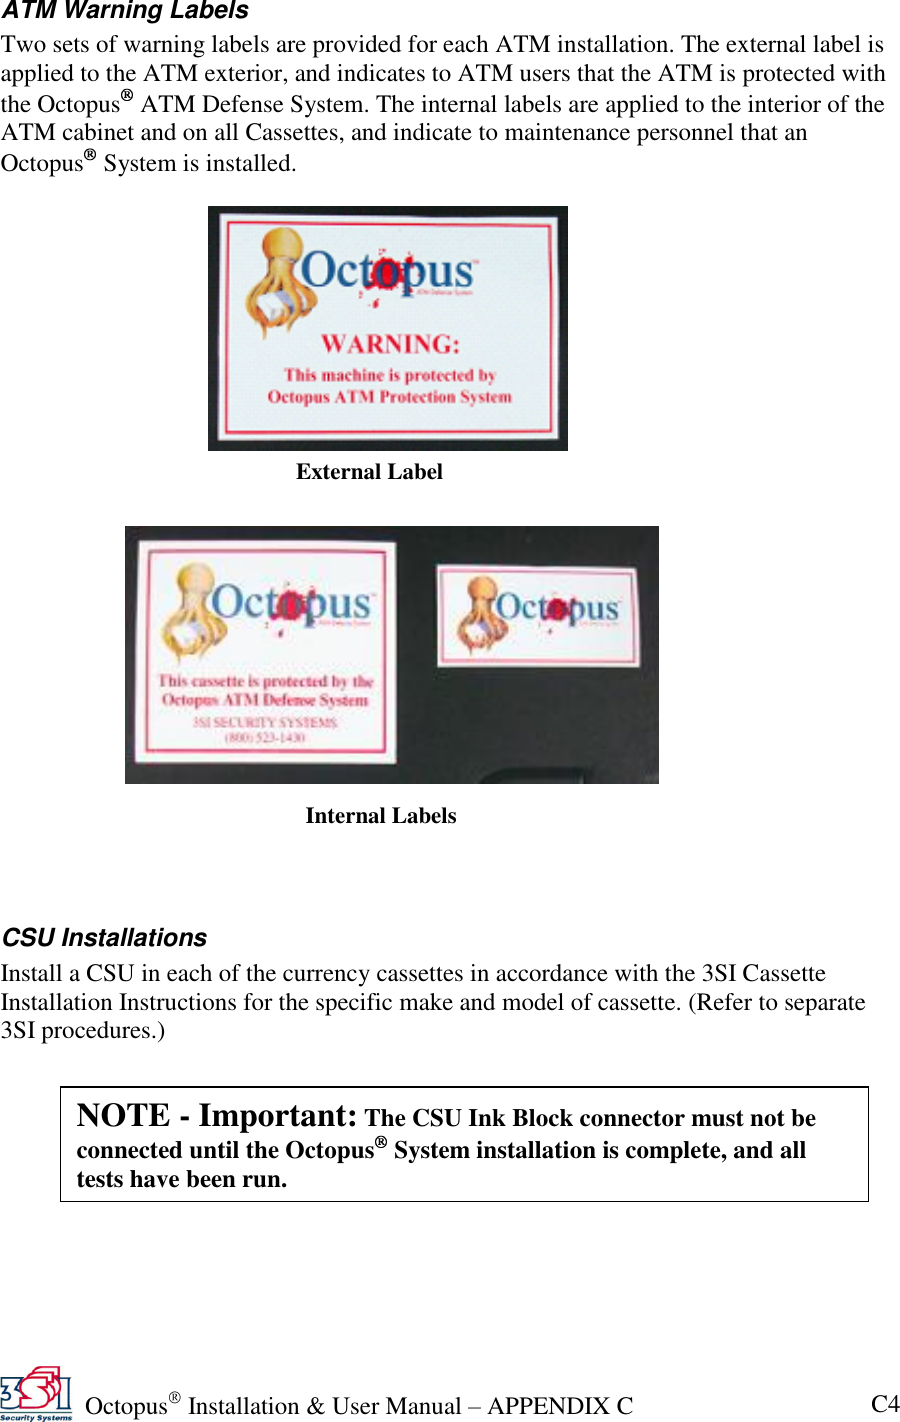   Octopus  Installation &amp; User Manual – APPENDIX C C4 ATM Warning Labels Two sets of warning labels are provided for each ATM installation. The external label is applied to the ATM exterior, and indicates to ATM users that the ATM is protected with the Octopus  ATM Defense System. The internal labels are applied to the interior of the ATM cabinet and on all Cassettes, and indicate to maintenance personnel that an Octopus  System is installed.                         CSU Installations Install a CSU in each of the currency cassettes in accordance with the 3SI Cassette Installation Instructions for the specific make and model of cassette. (Refer to separate 3SI procedures.)External Label Internal Labels NOTE - Important: The CSU Ink Block connector must not be connected until the Octopus  System installation is complete, and all tests have been run. 